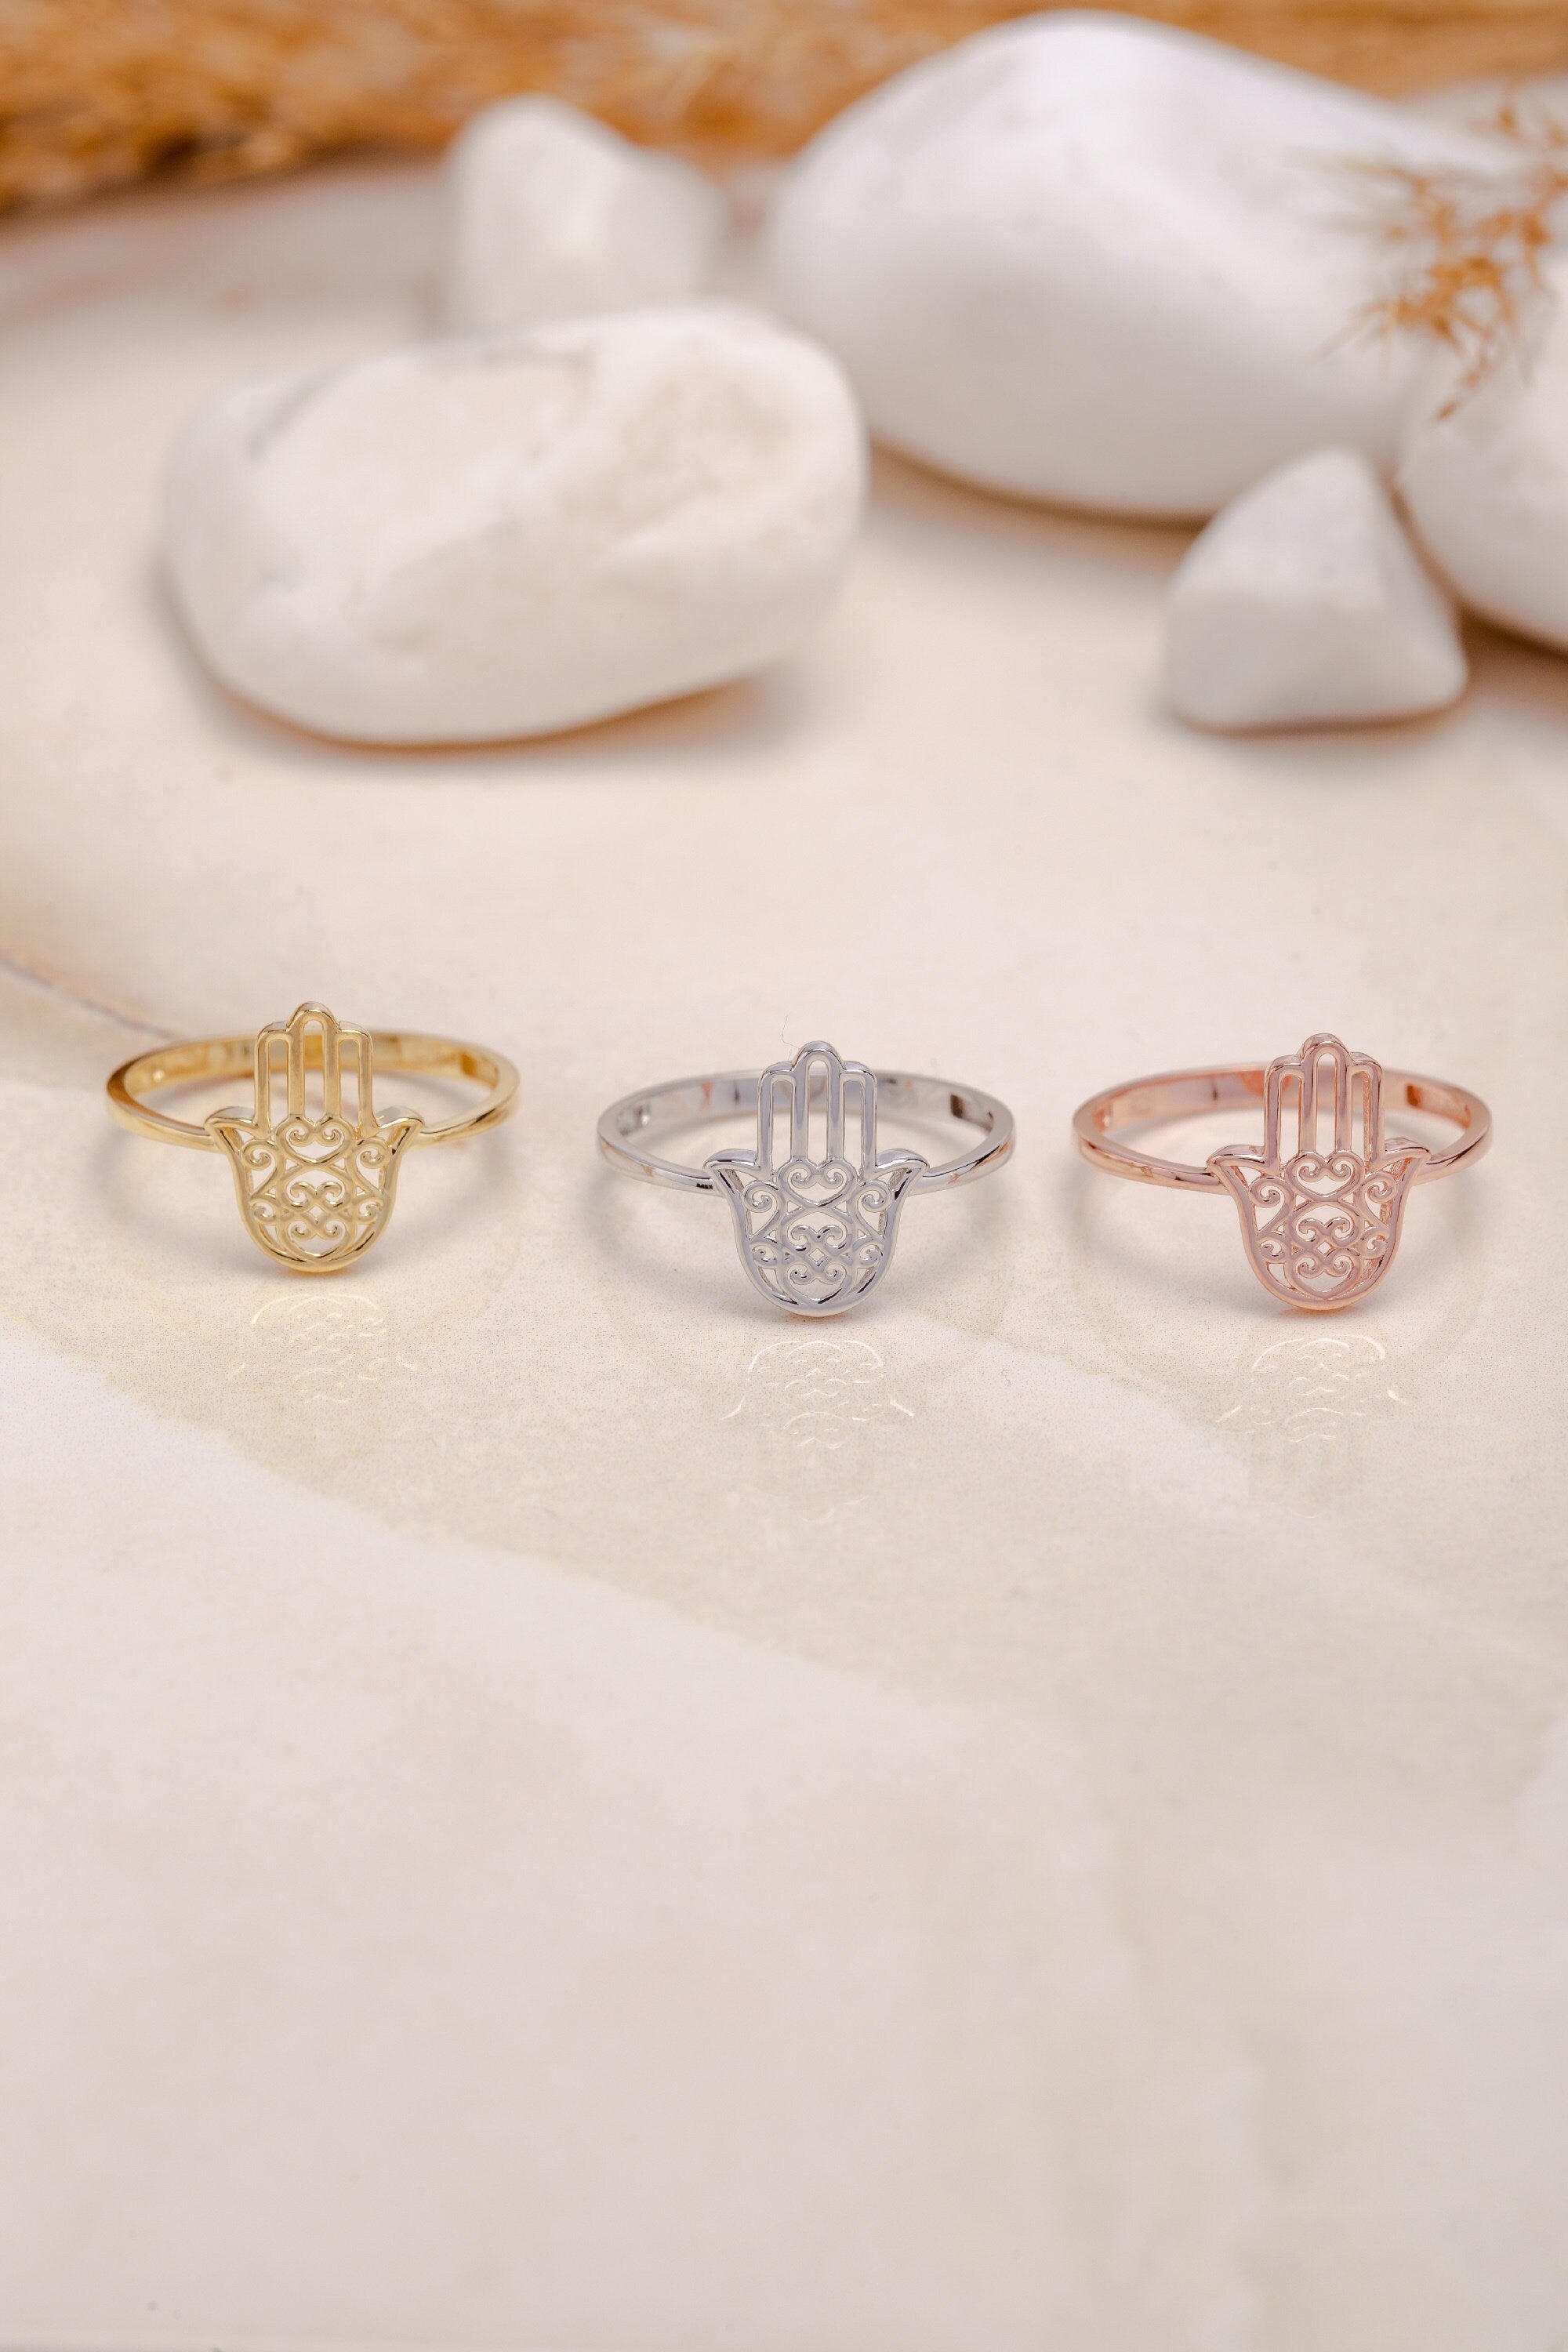 18K Solid Gold Hamsa Hand Ring, Hamsa Islamic Gold Ring, Hamsa Islamic Gold Ring, Gift For Mother Day, Mother Day Jewelry, Gift for Her